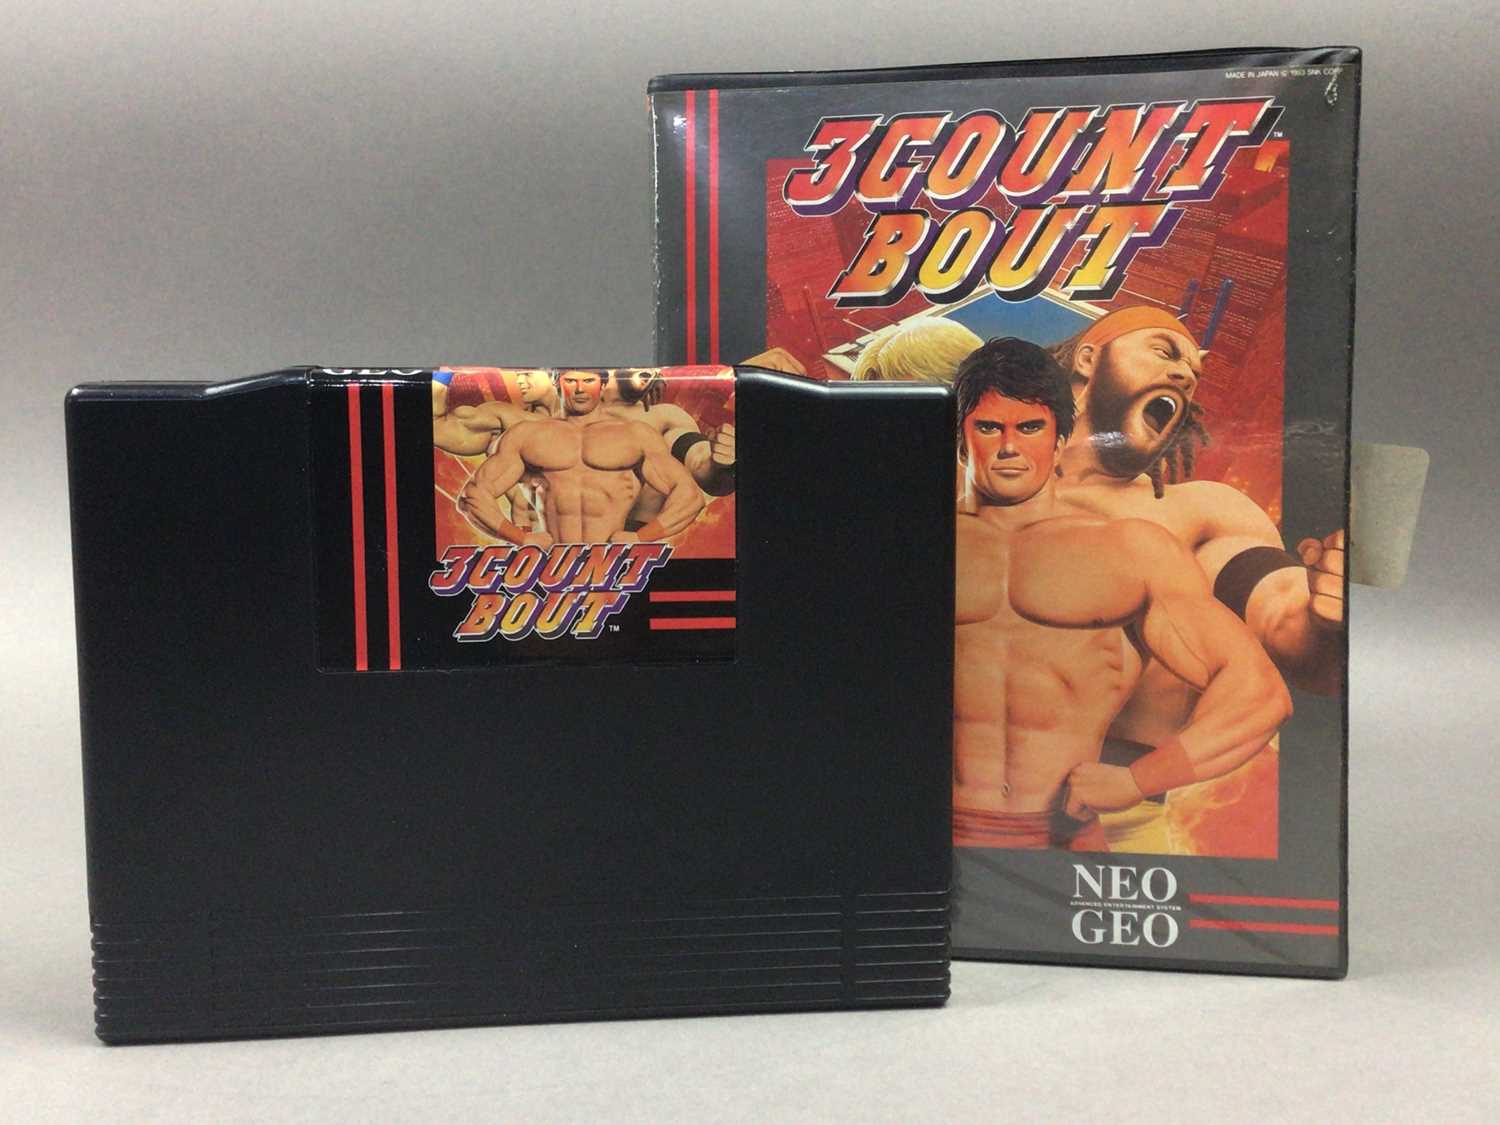 Lot 1005 - SNK NEO GEO - 3 COUNT BOUT